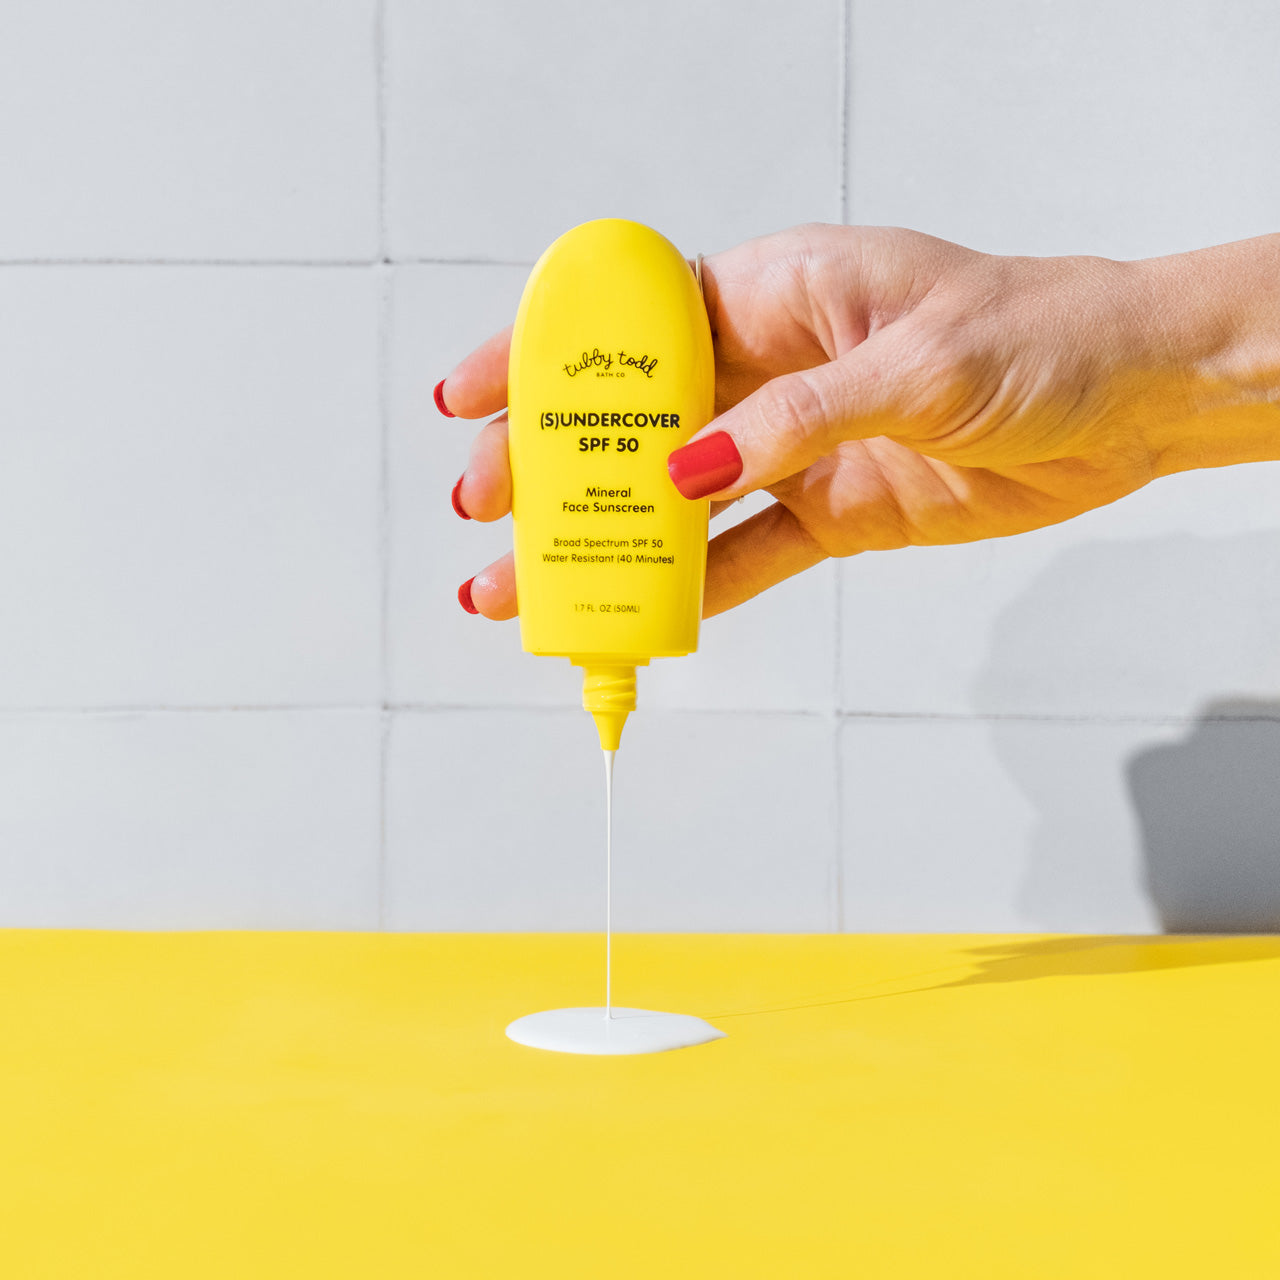 Mama squeezing (S)undercover product onto yellow table